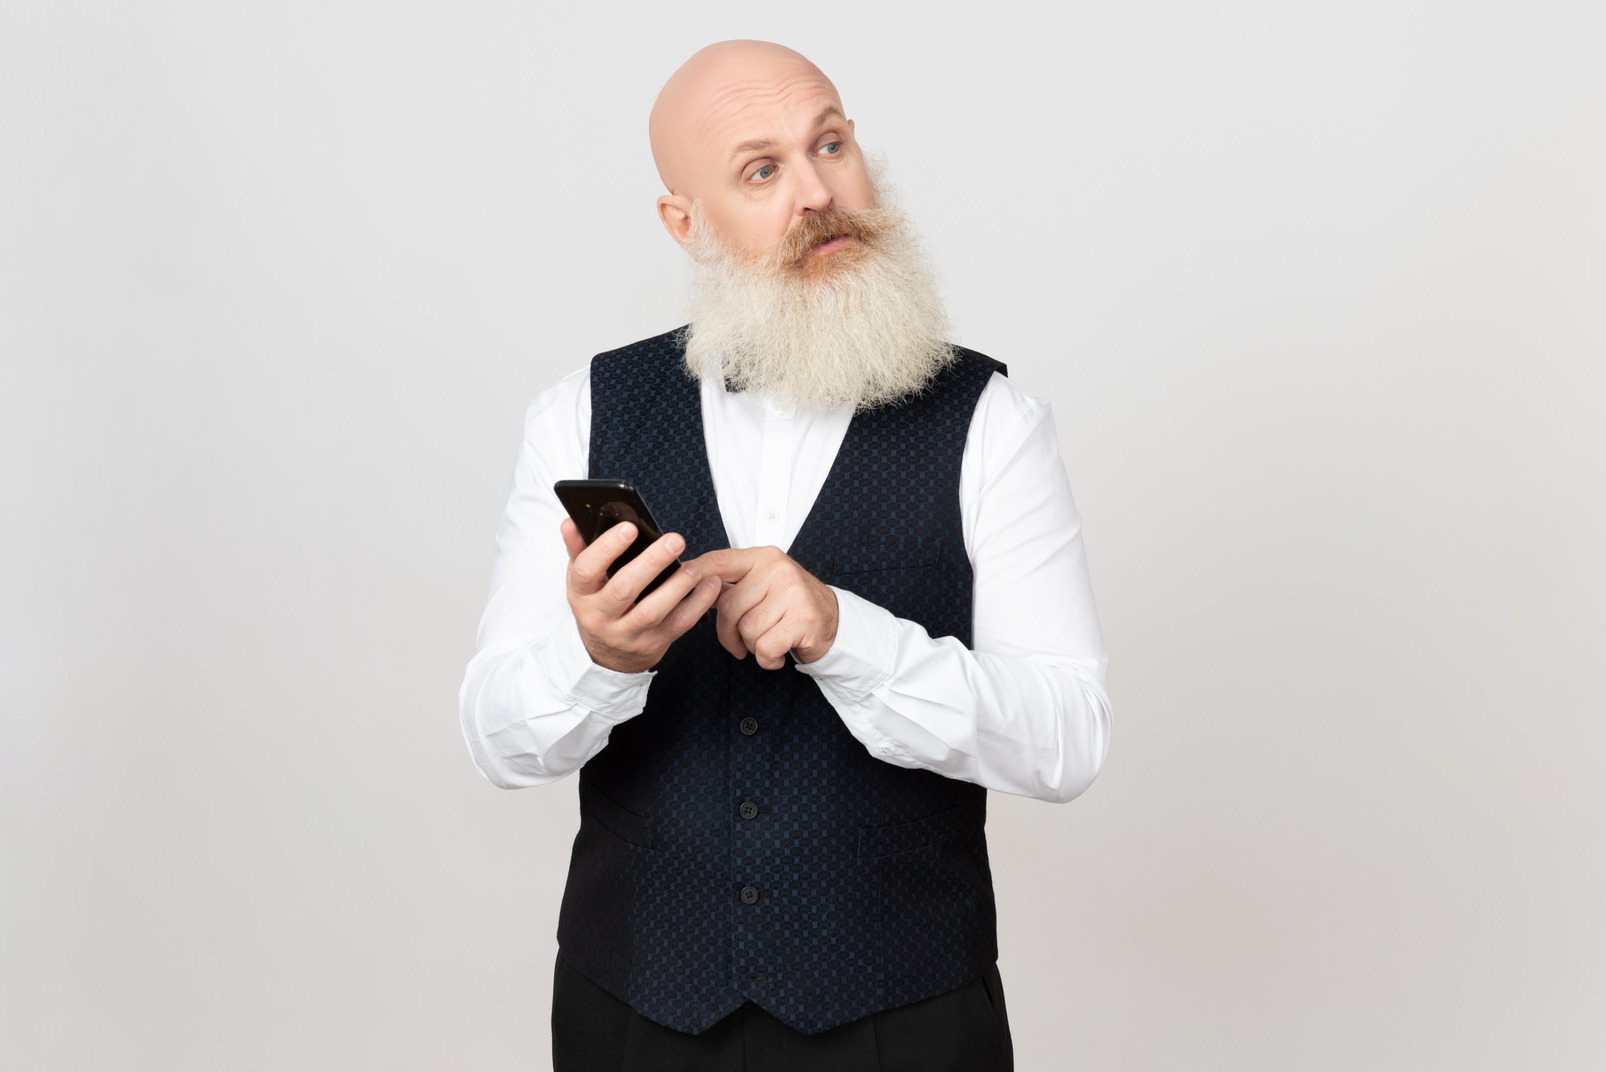 Aged man holding phone and looking aside